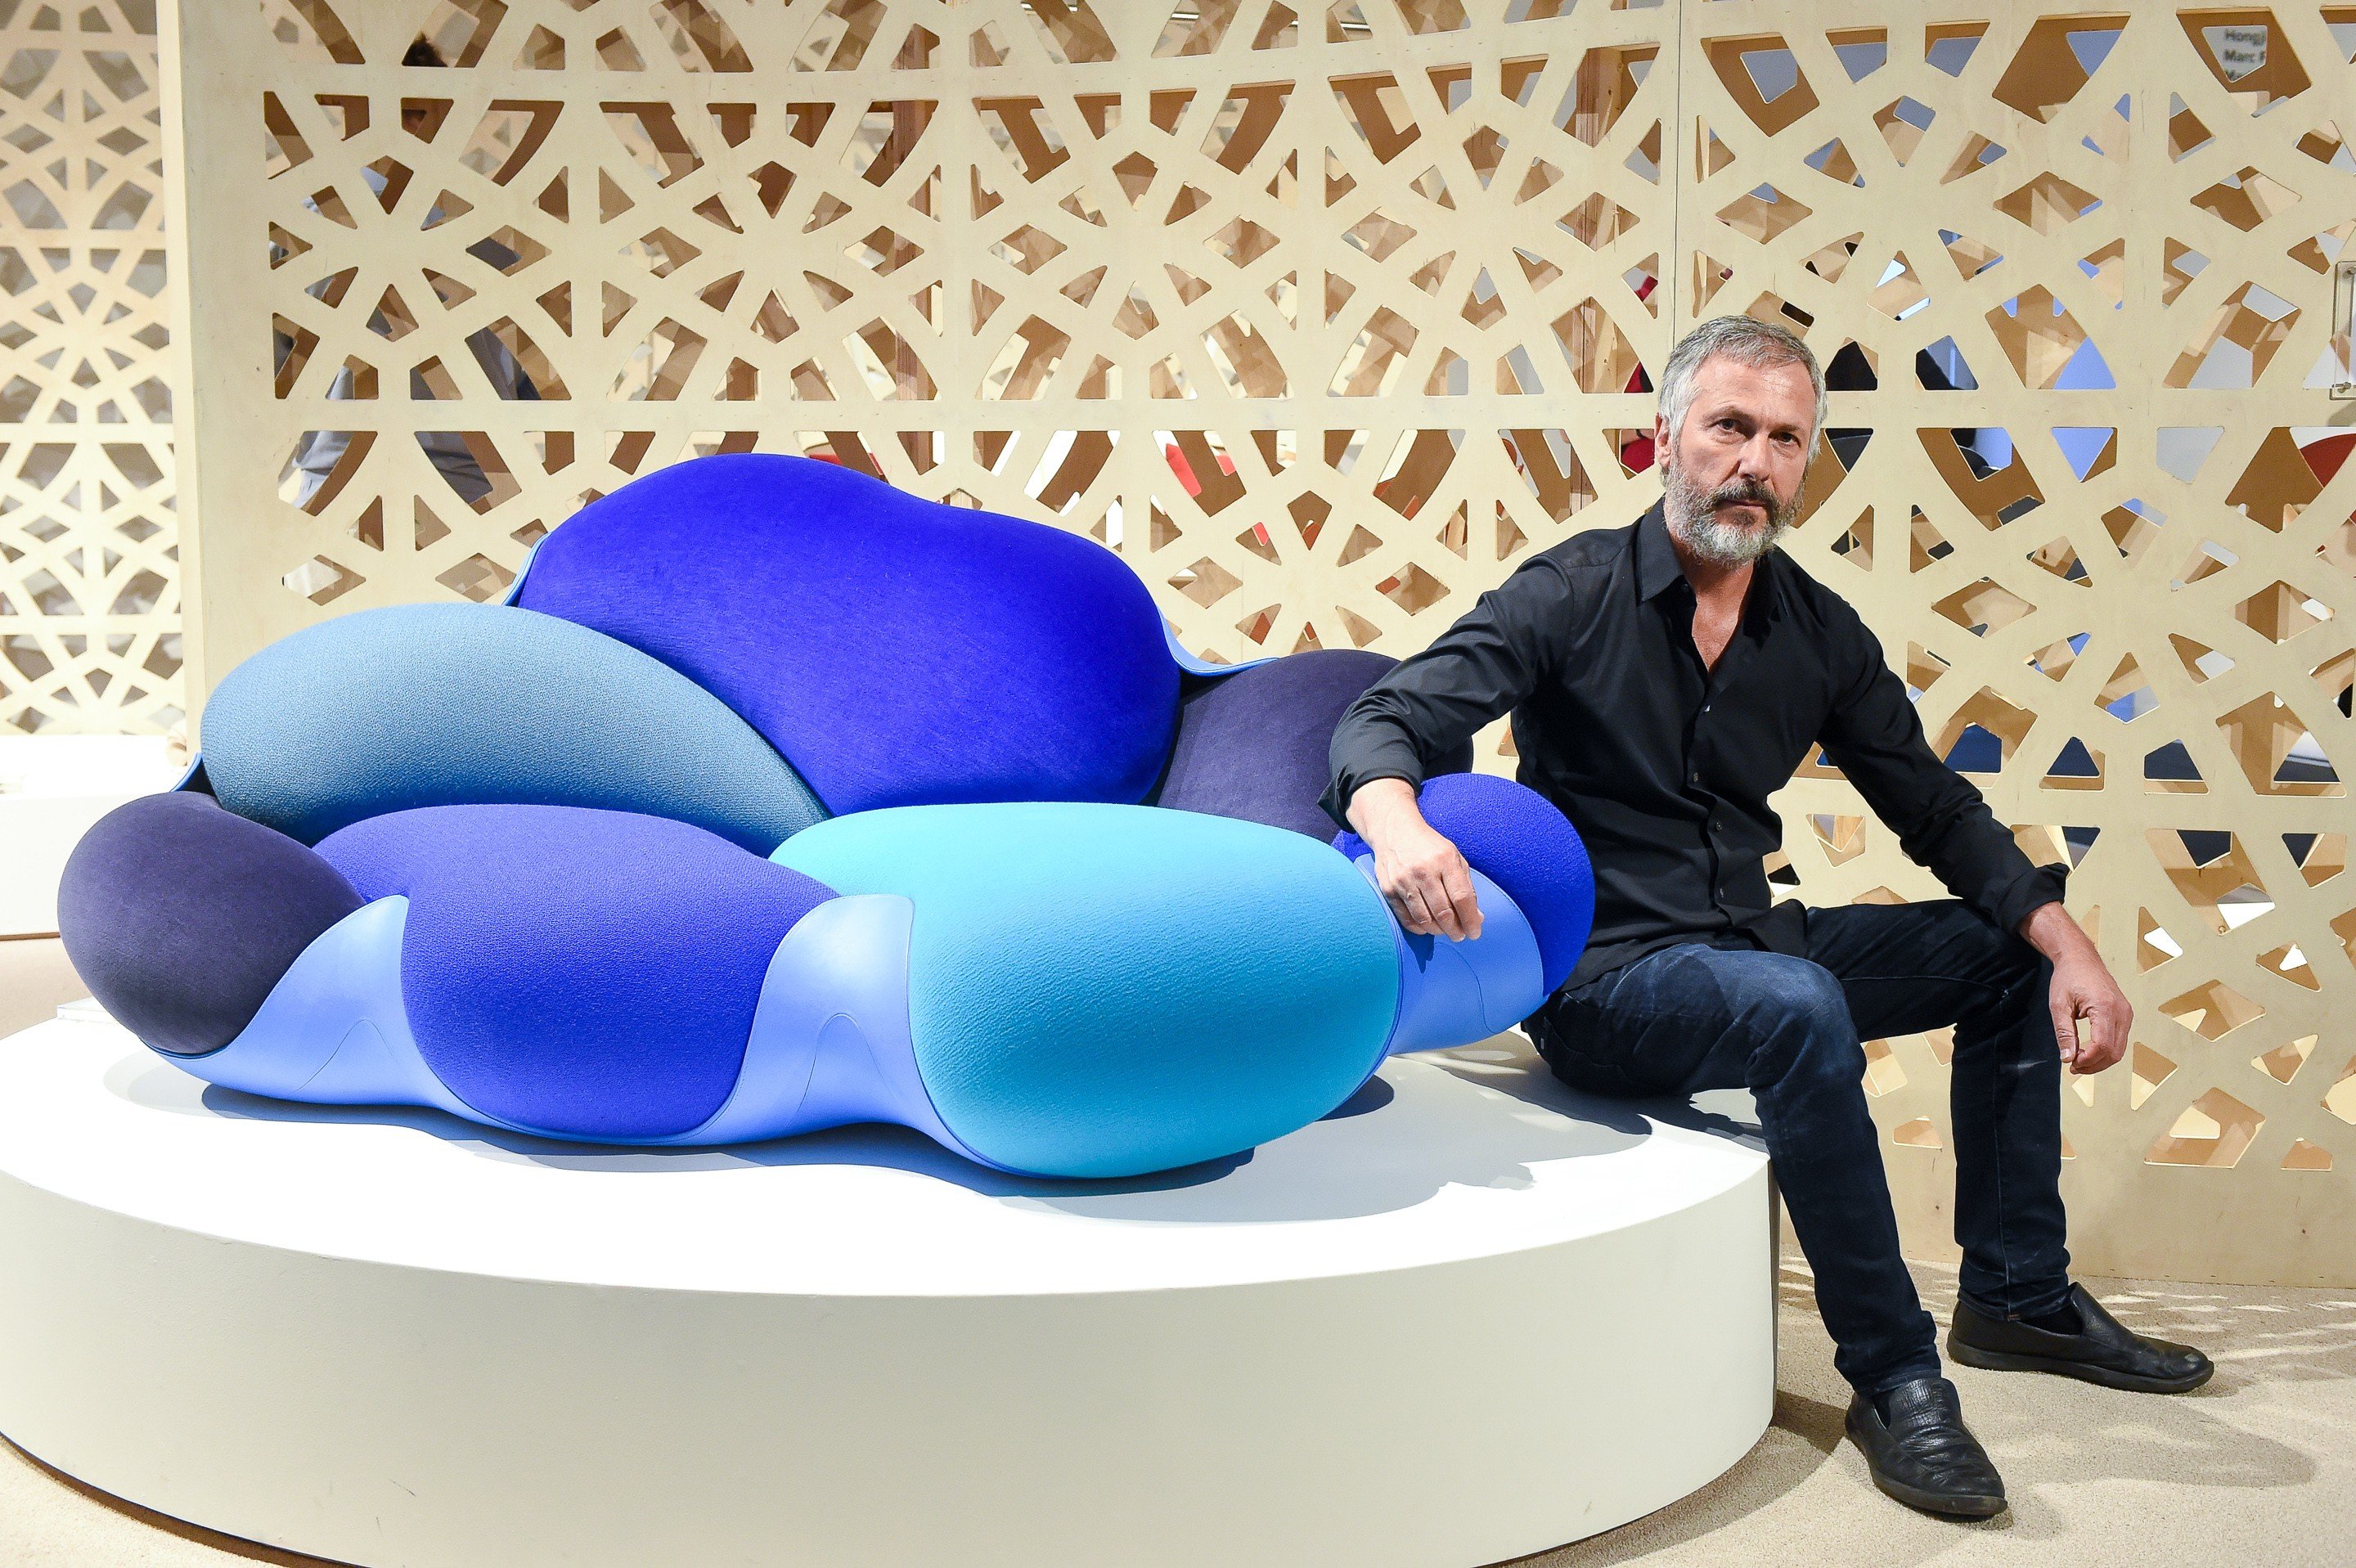 Humberto Campana and the Bomboca Sofa, a riot of organic shapes in shades of sea and sky, named after the confectionery served at Brazilian weddings. The sofa was designed for Louis Vuitton by Humberto and Fernando Campana. Photo: Joe Schildhorn/BFA.com